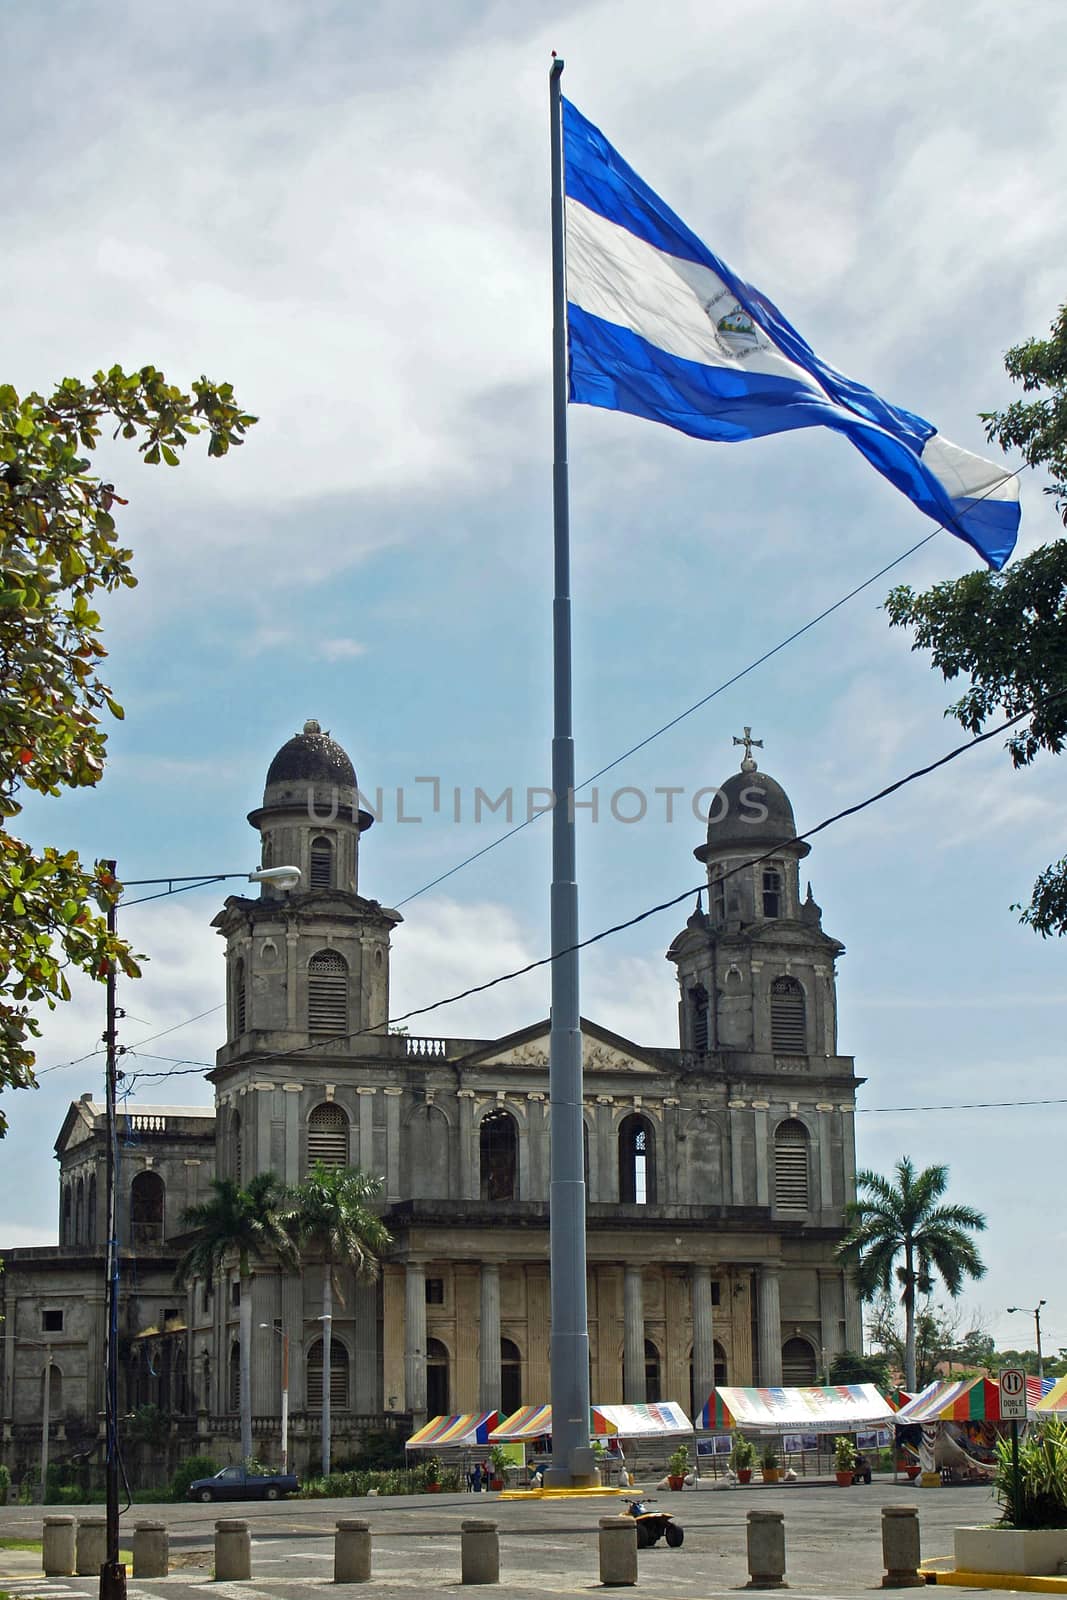 MANAGUA, NICARAGUA - NOVEMBER 10, 2007: Flagpole with Nicaraguan national flag and ruin of the cathedral in the background on November 10, 2007 in Managua, Nicaragua